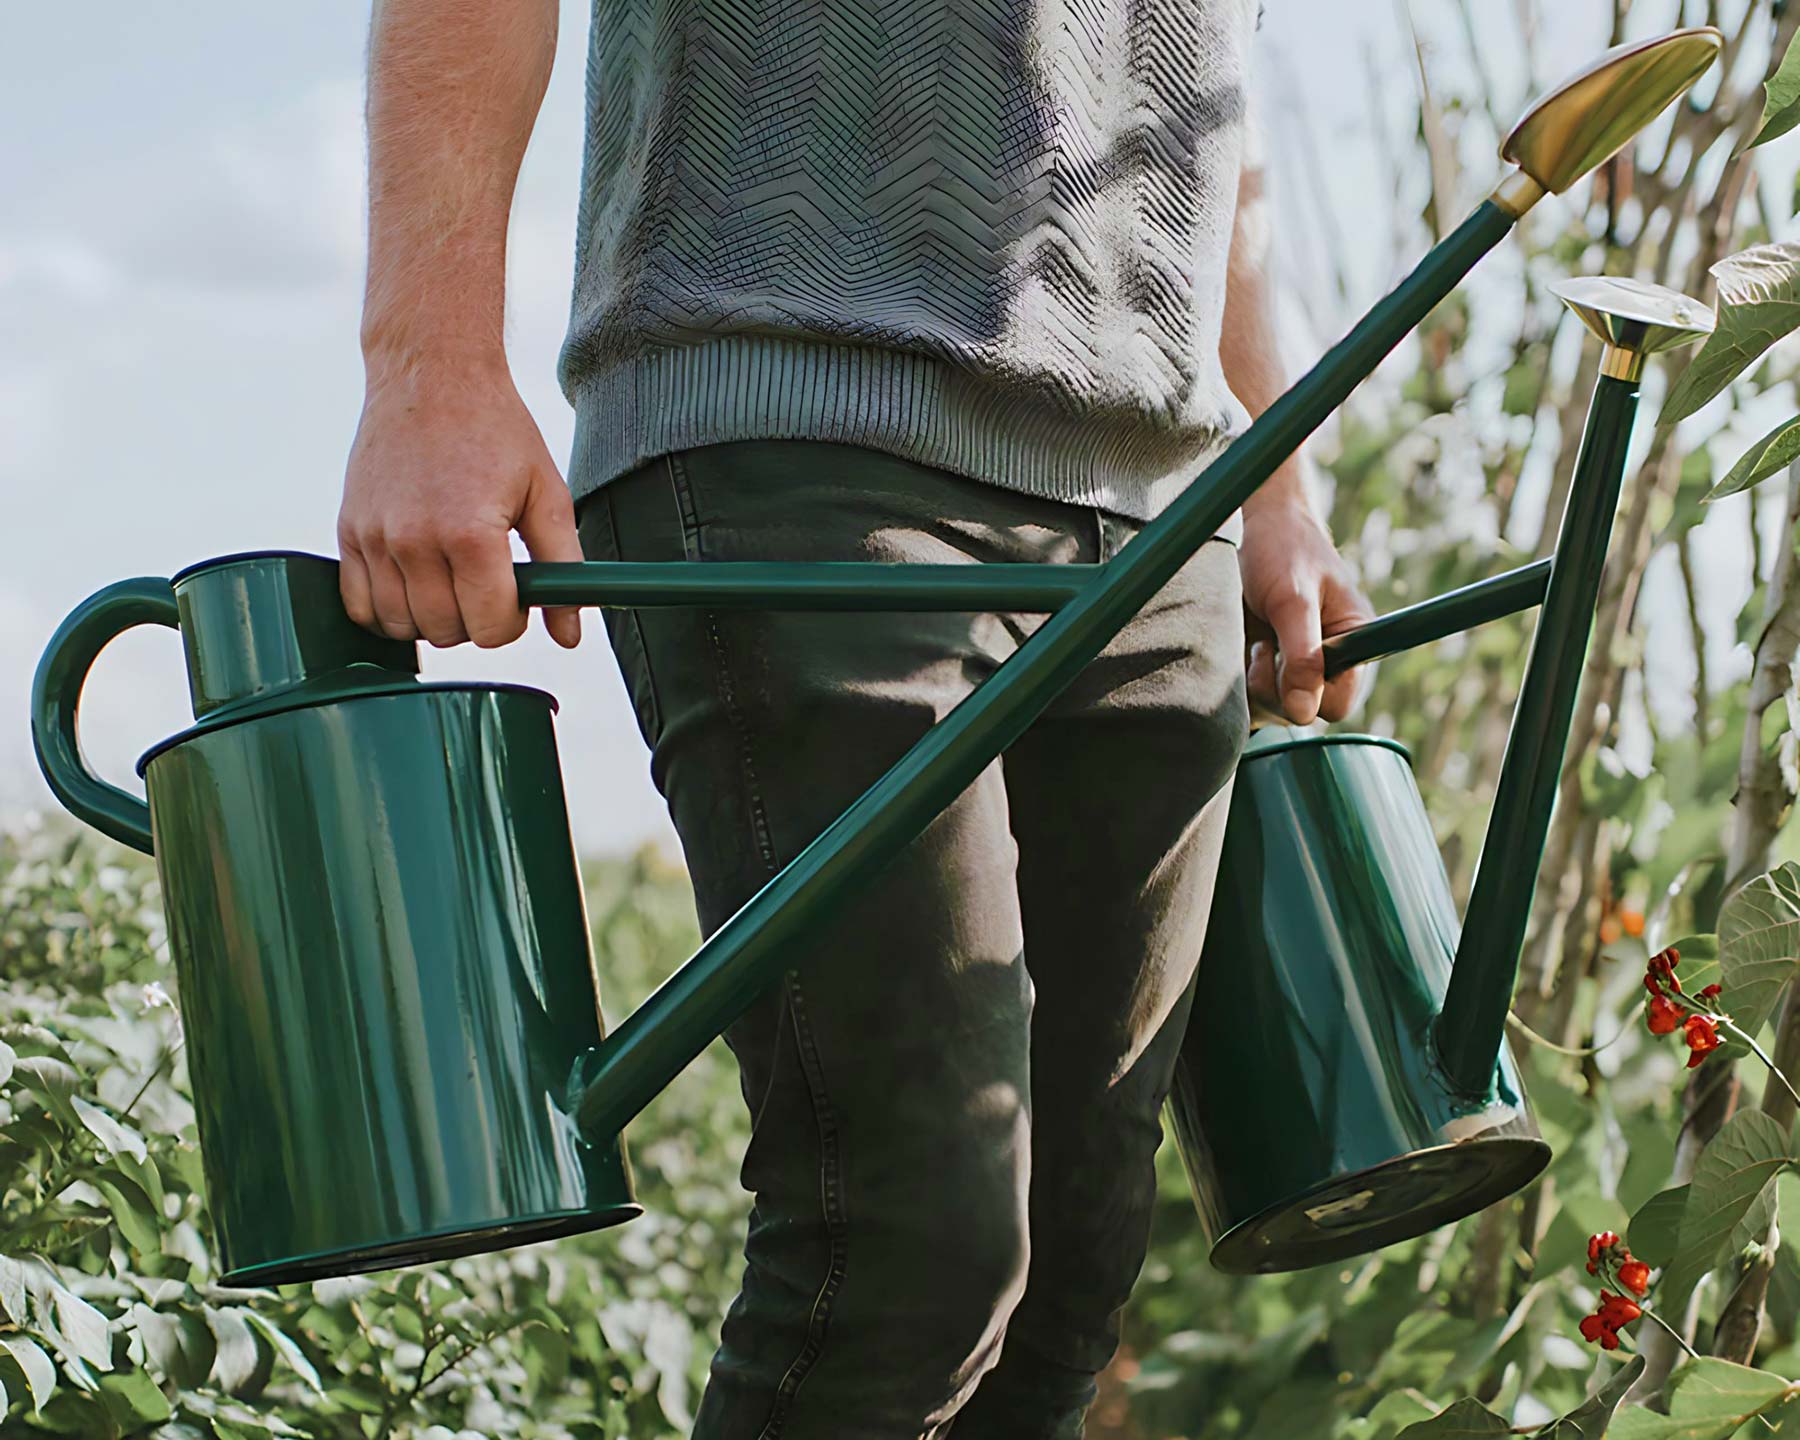 The Haws Warley Watering Cans - in 4.5litre and 9litre